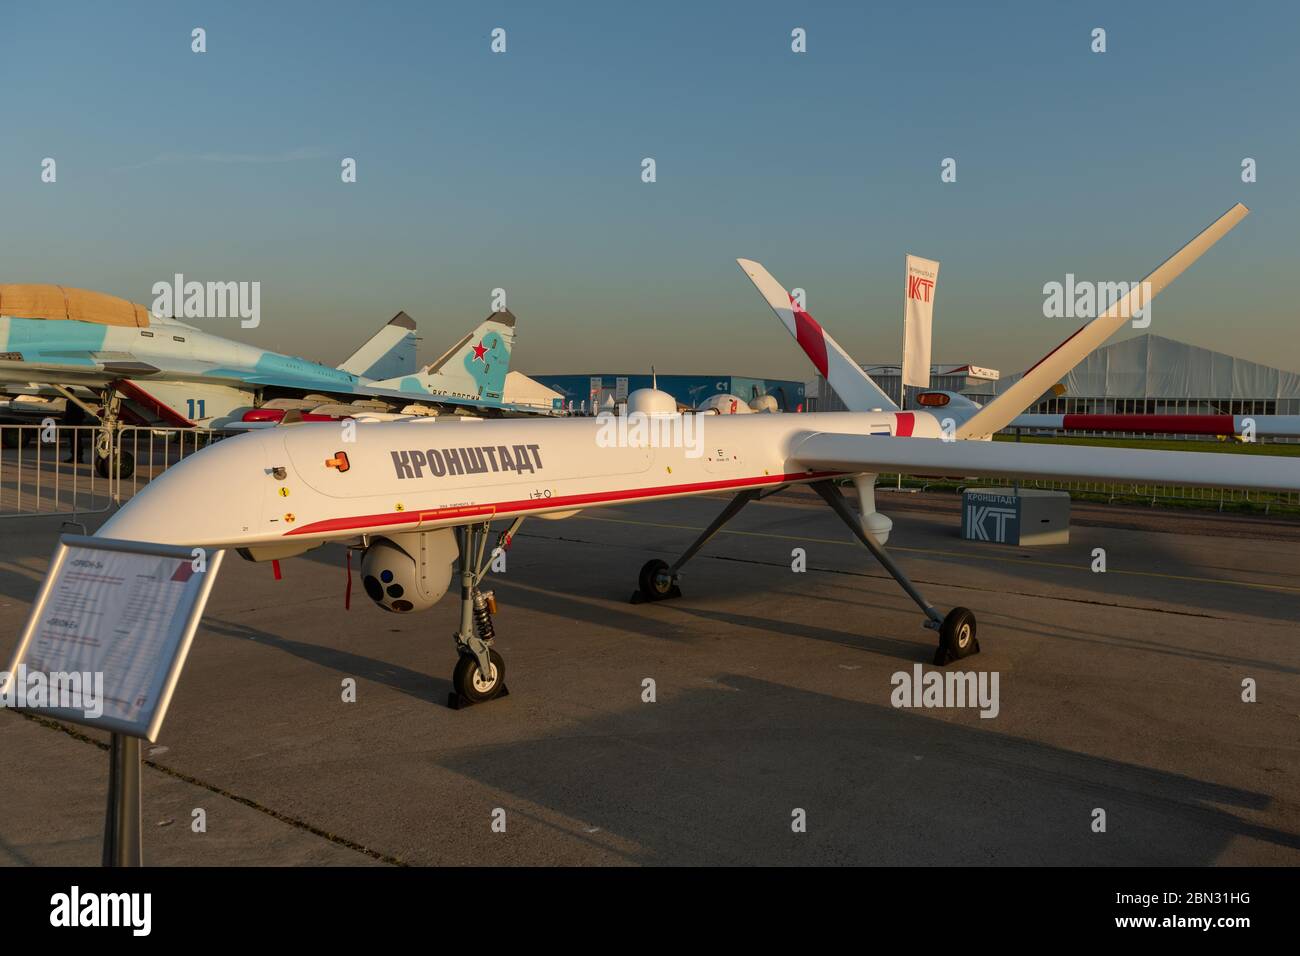 August 30, 2019. Zhukovsky, Russia. Russian unmanned aerial vehicle (UAV) long-duration flight developed by company 'Kronstadt' (AFK Sistema) at the I Stock Photo